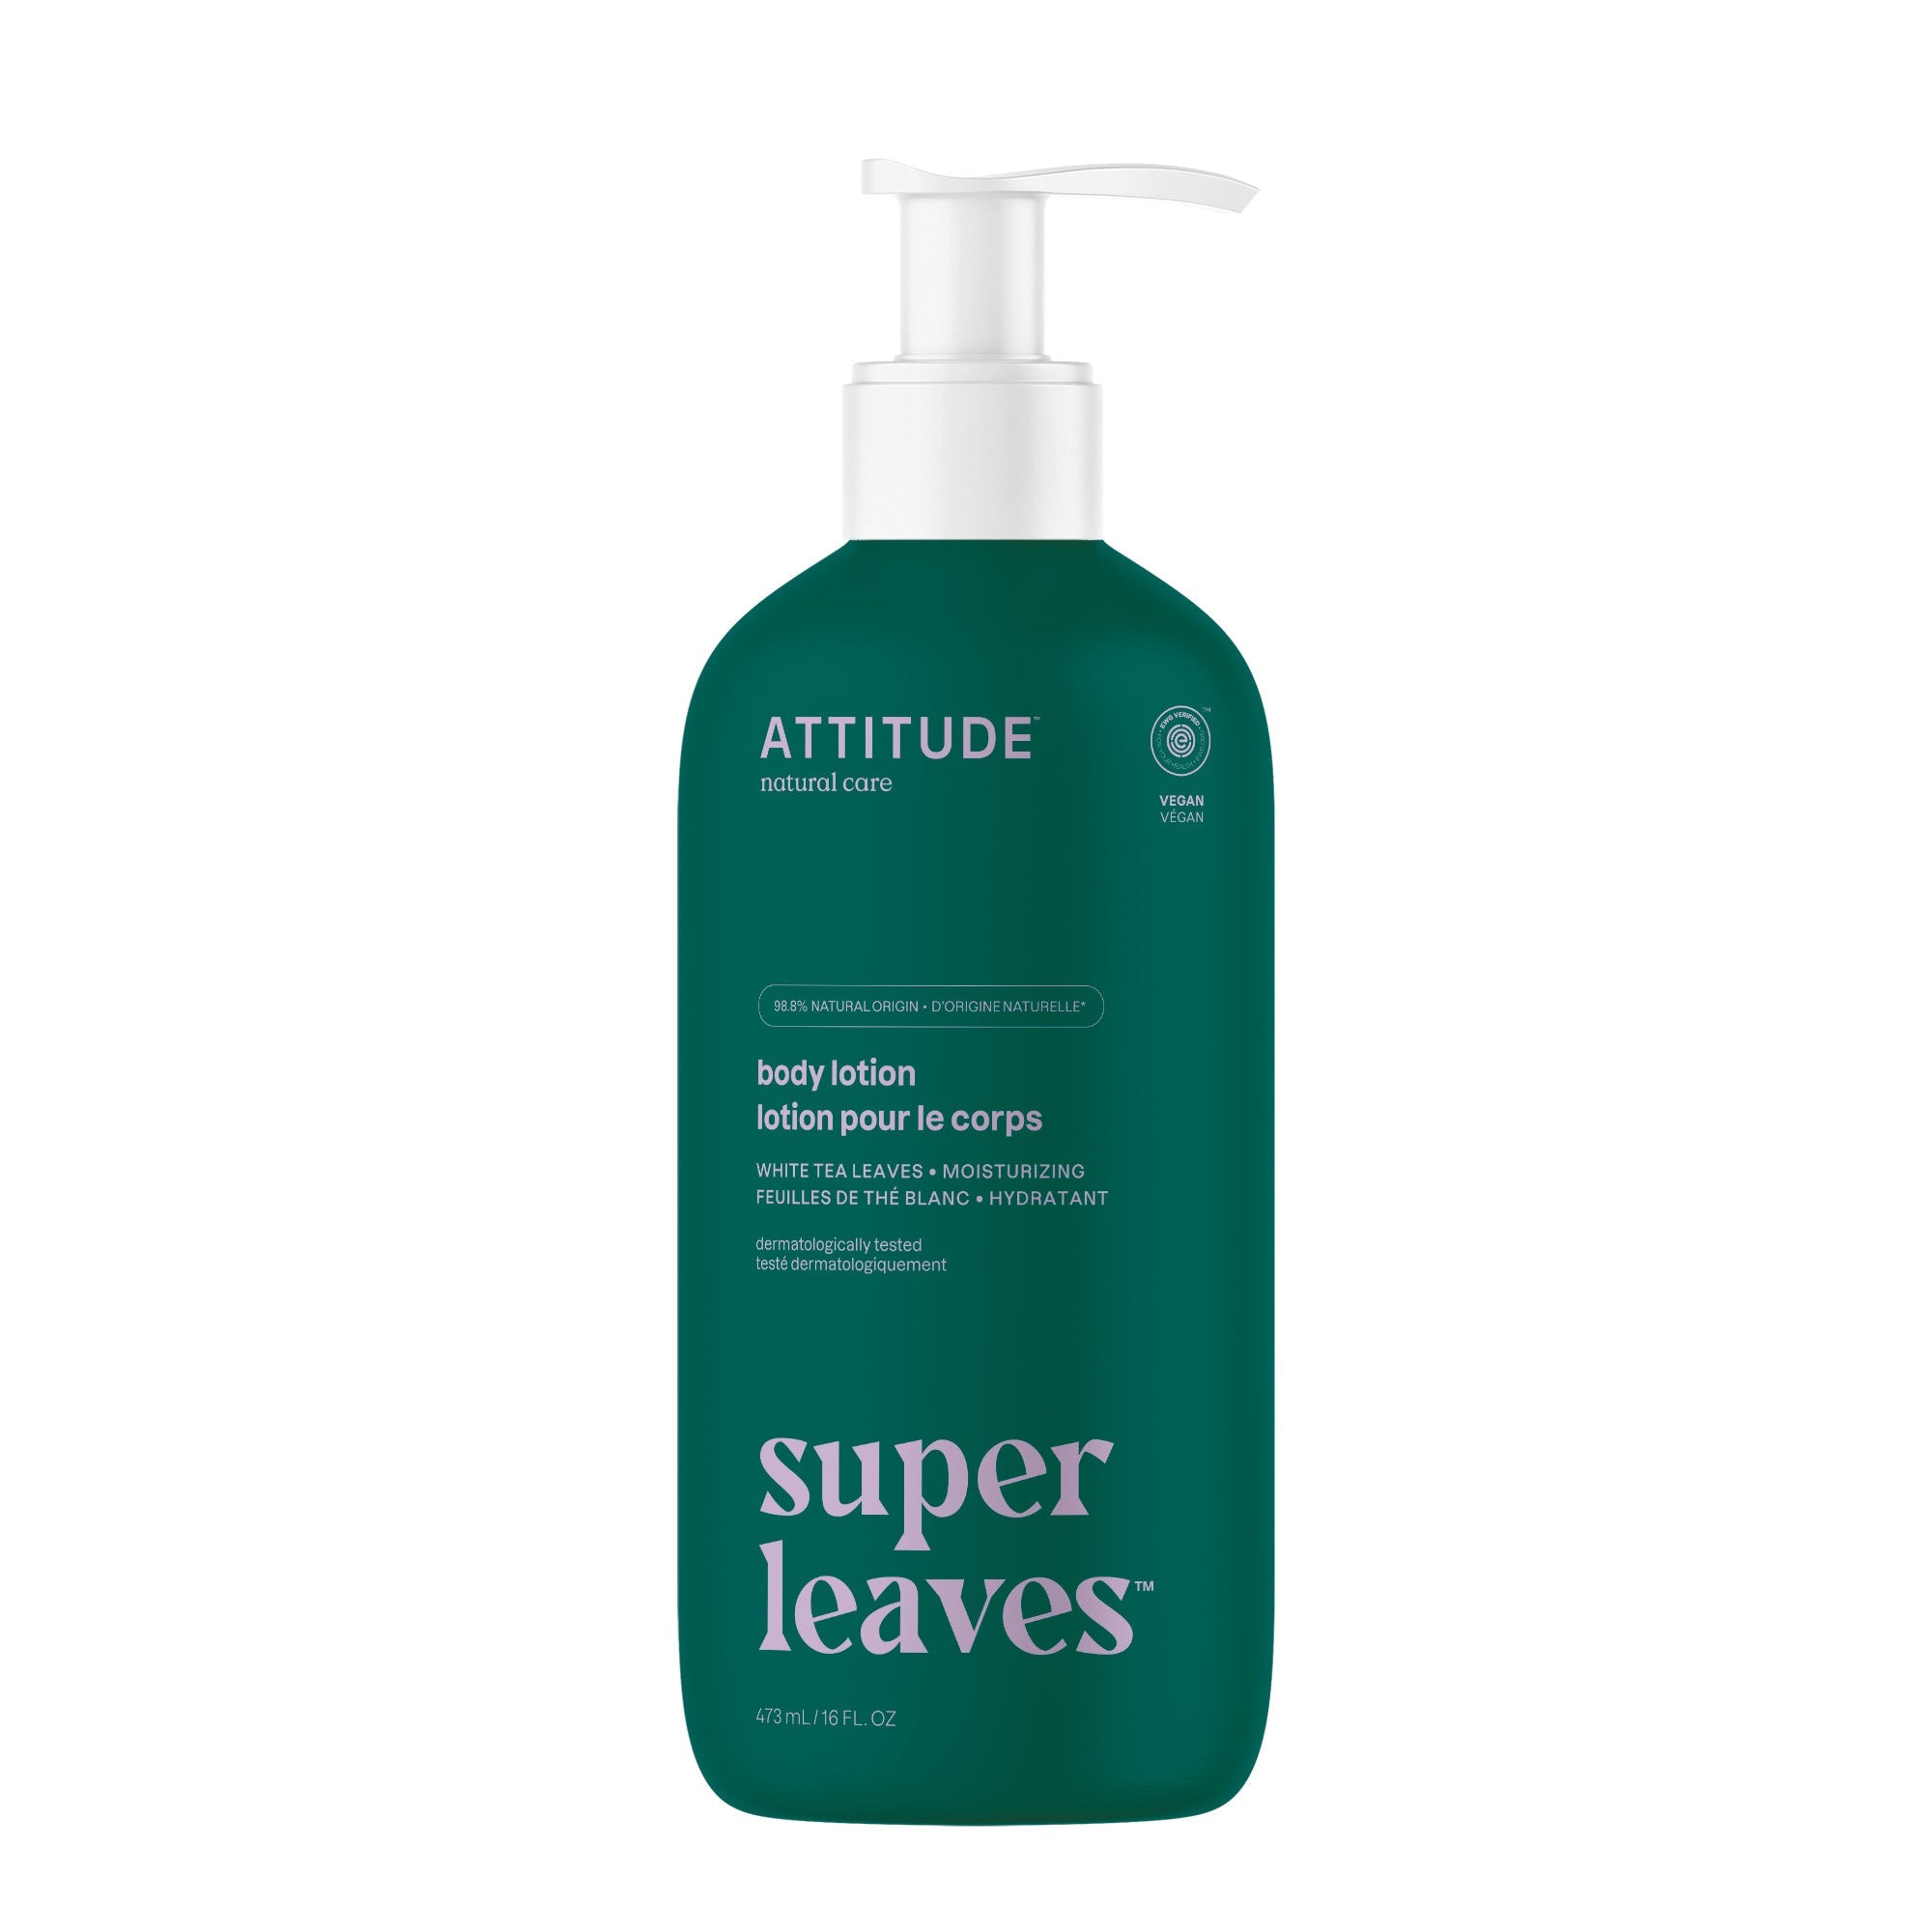 ATTITUDE Super leaves™ Body Lotion Soothing White Tea Leaves 18187_en?_main? White Tea Leaves